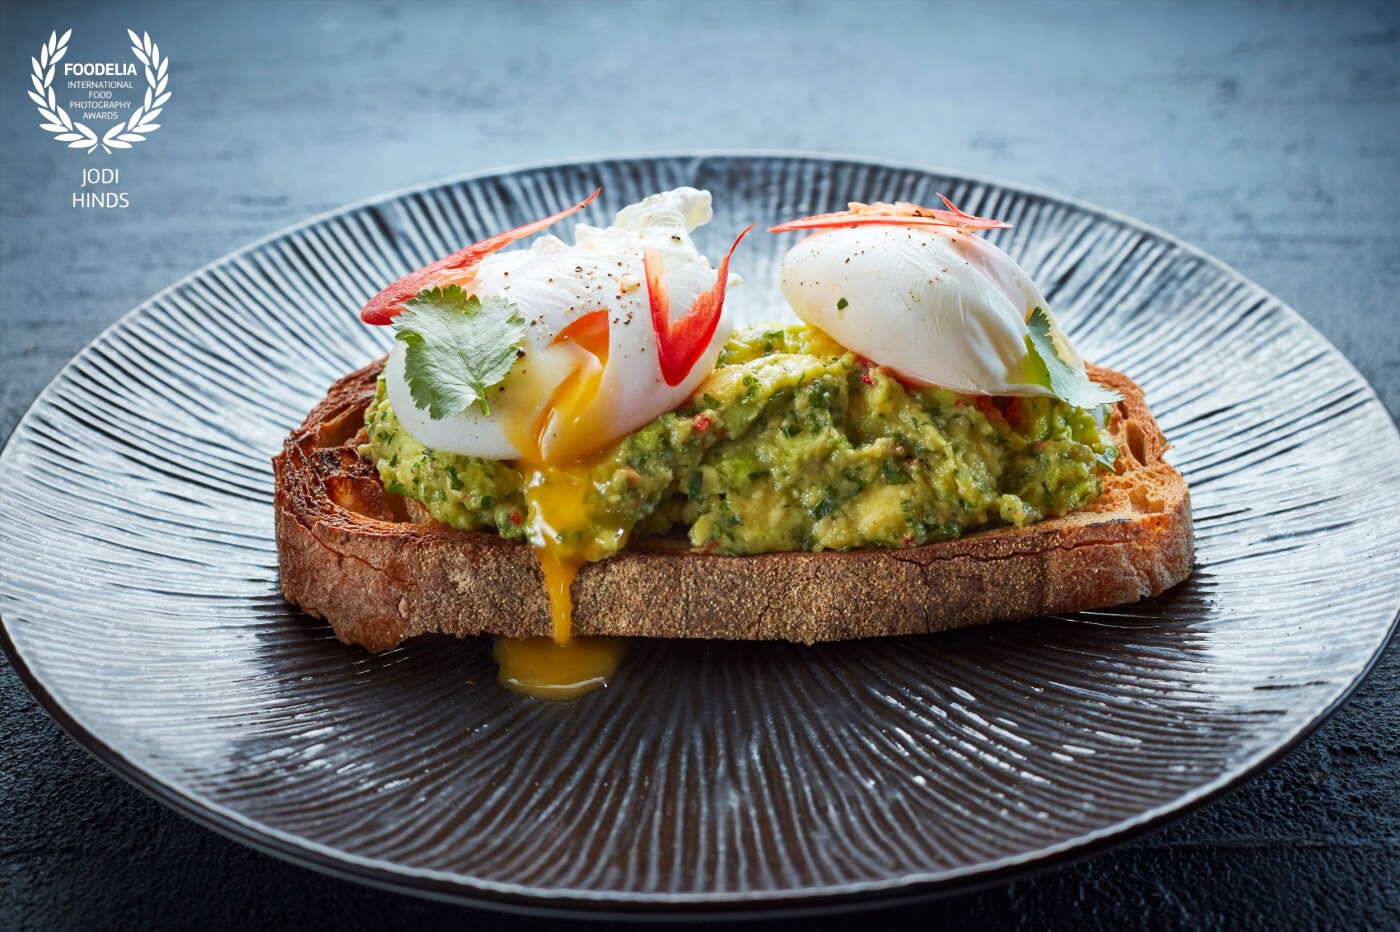 Weekend breakfasts don't get much better than avocado and eggs on toast! A great new restaurant opening in London is Tom, Dick & Harry's <br />
<br />
Restaurant: @tdhloughton<br />
Communications: @rochecom<br />
Photographer: @jodihindsphoto